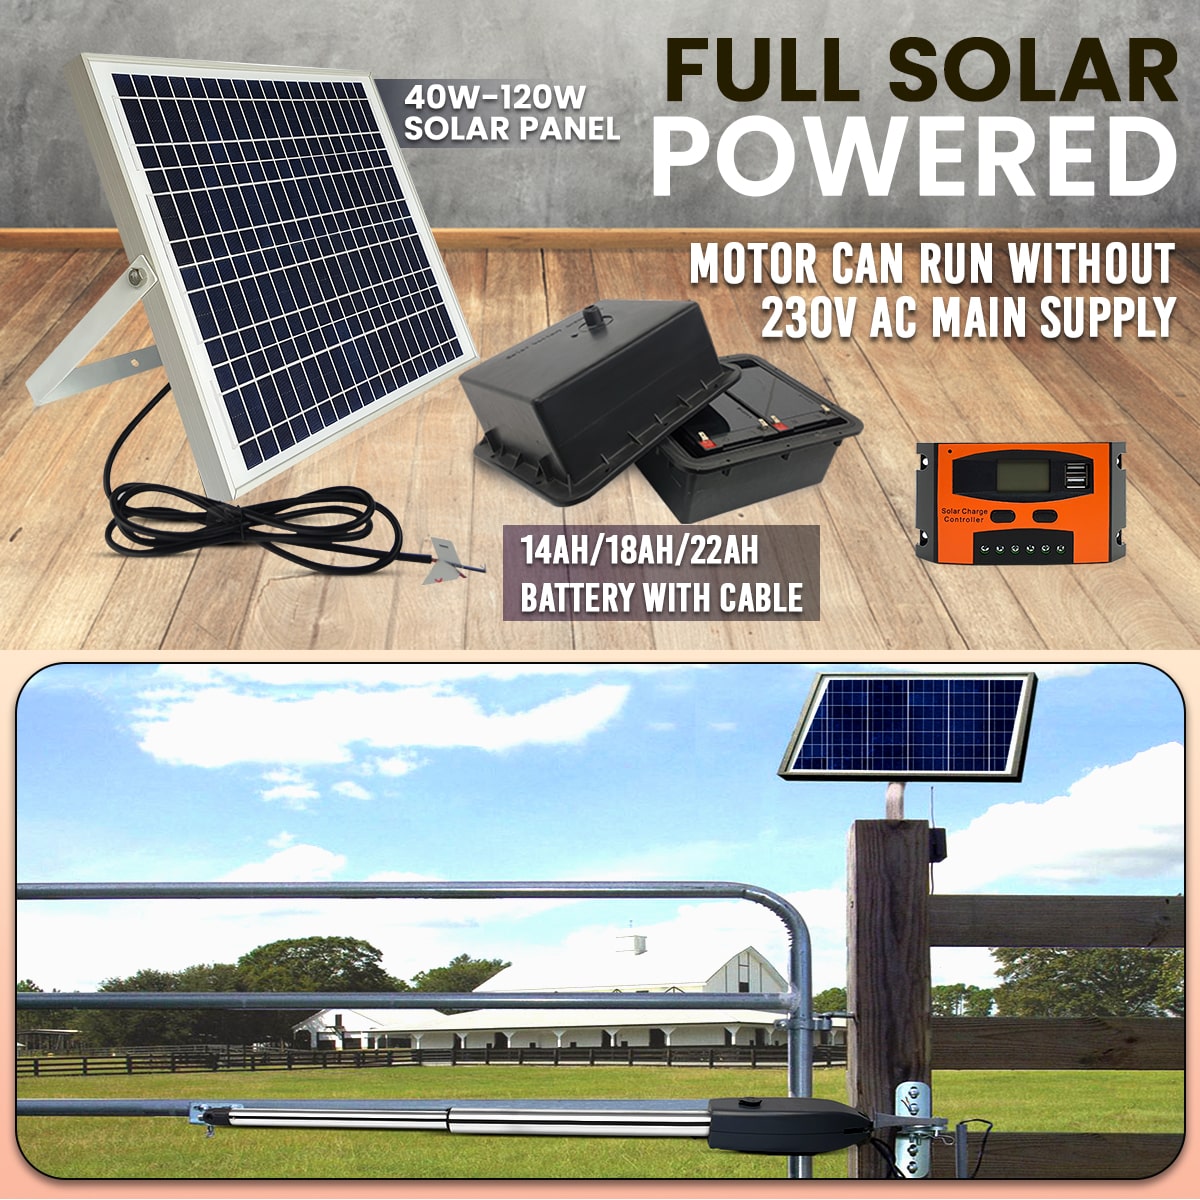 Automatic, Single Swing, Gate Opener Kit ,Full Solar Powered with push button, gatomate